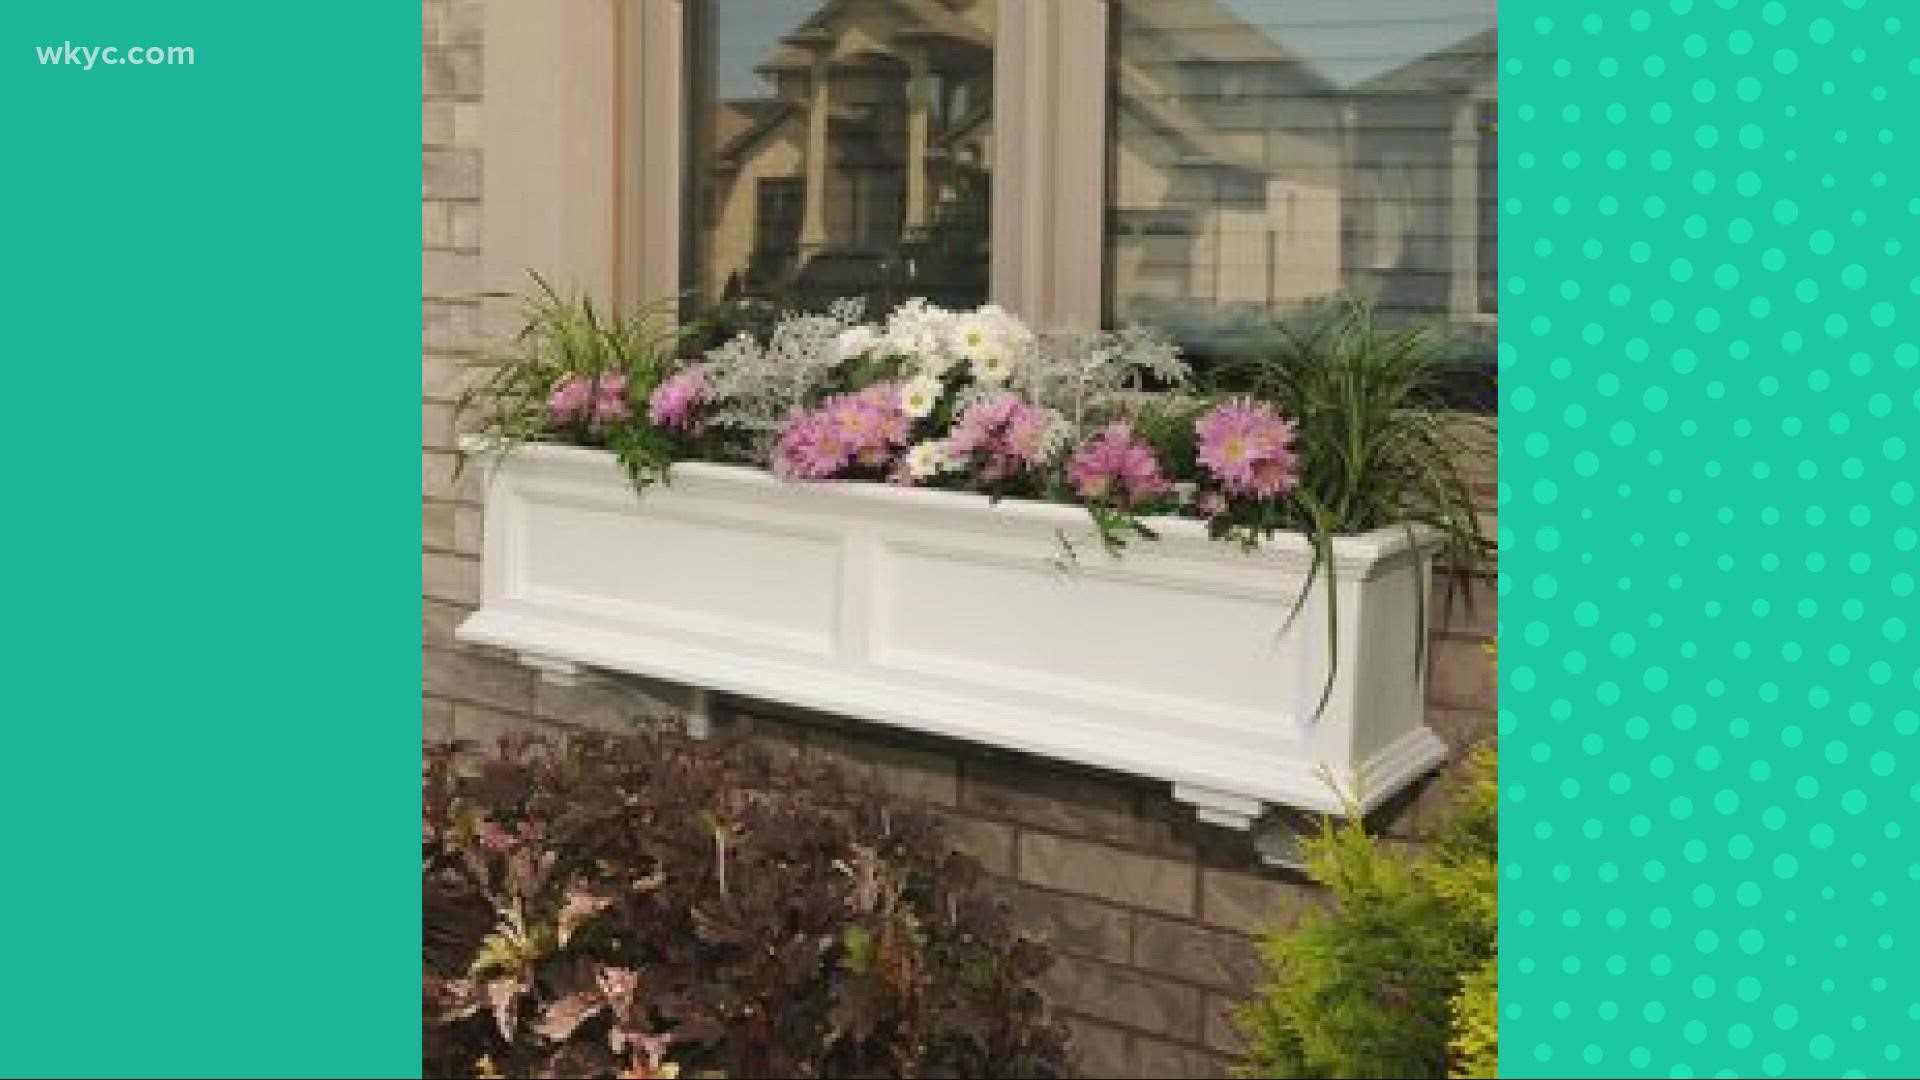 Jay Crawford is taking on home improvement so you don't have to...or so that you can follow along! Check out his tutorial on window box planters.